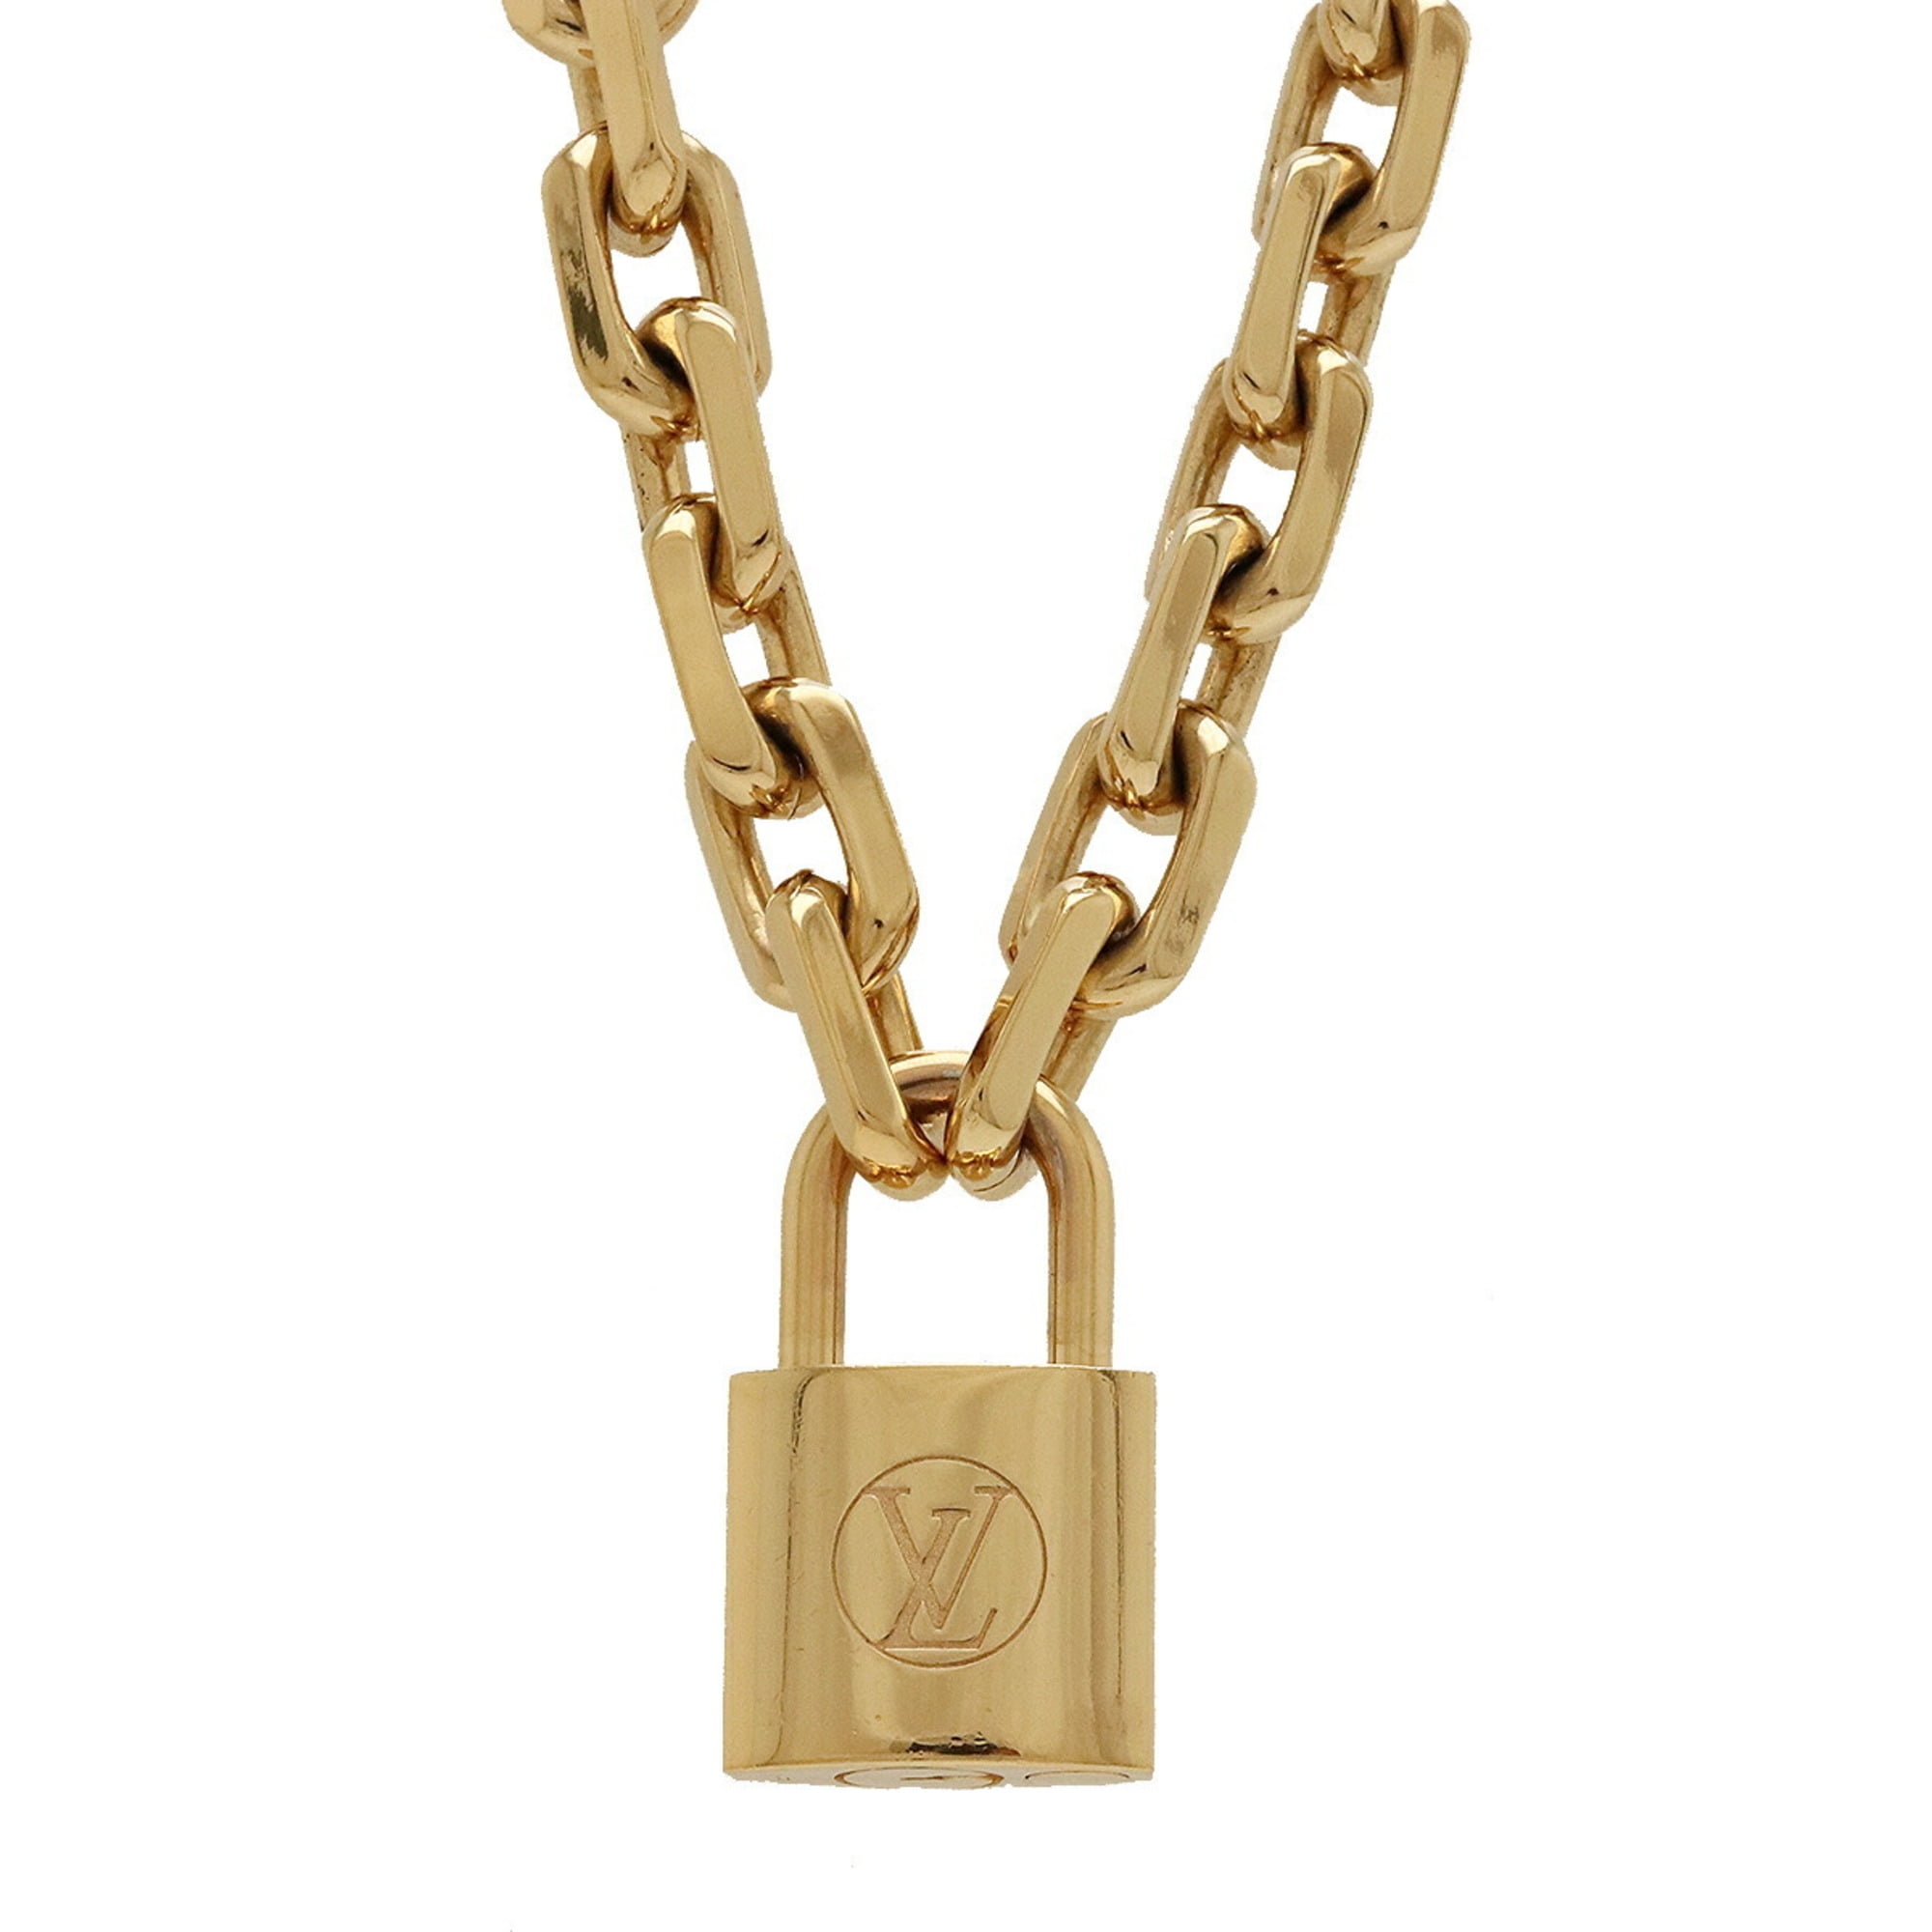 Louis Vuitton Padlock Necklace with Double Chain | eBay